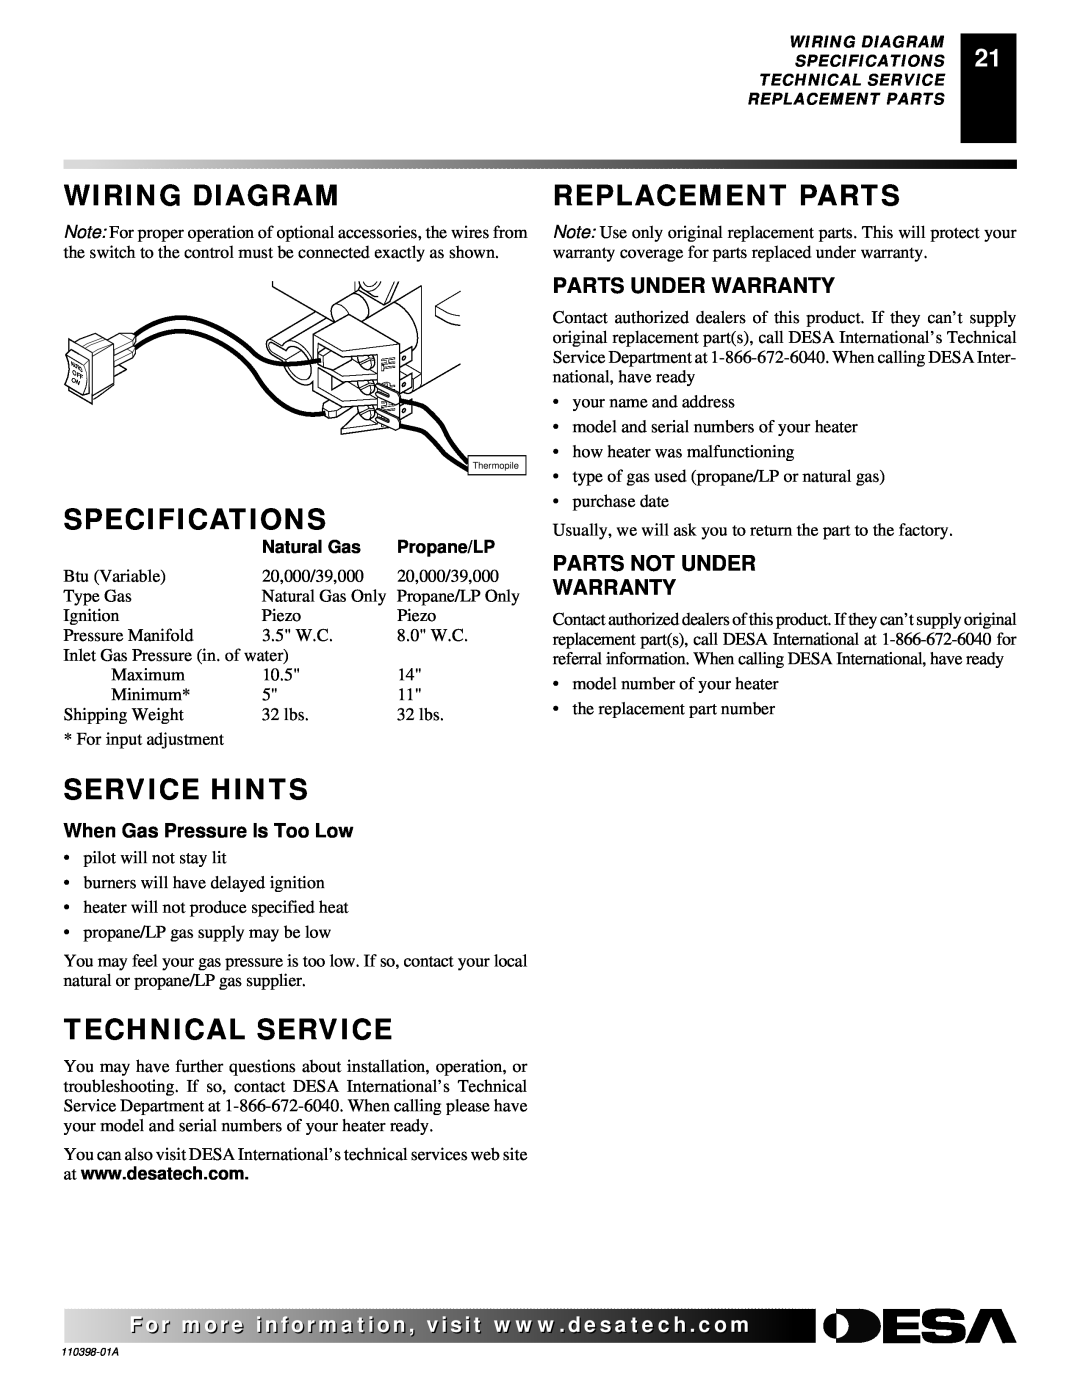 Desa VYM27NRPR installation manual Wiring Diagram, Specifications, Service Hints, Technical Service, Replacement Parts 